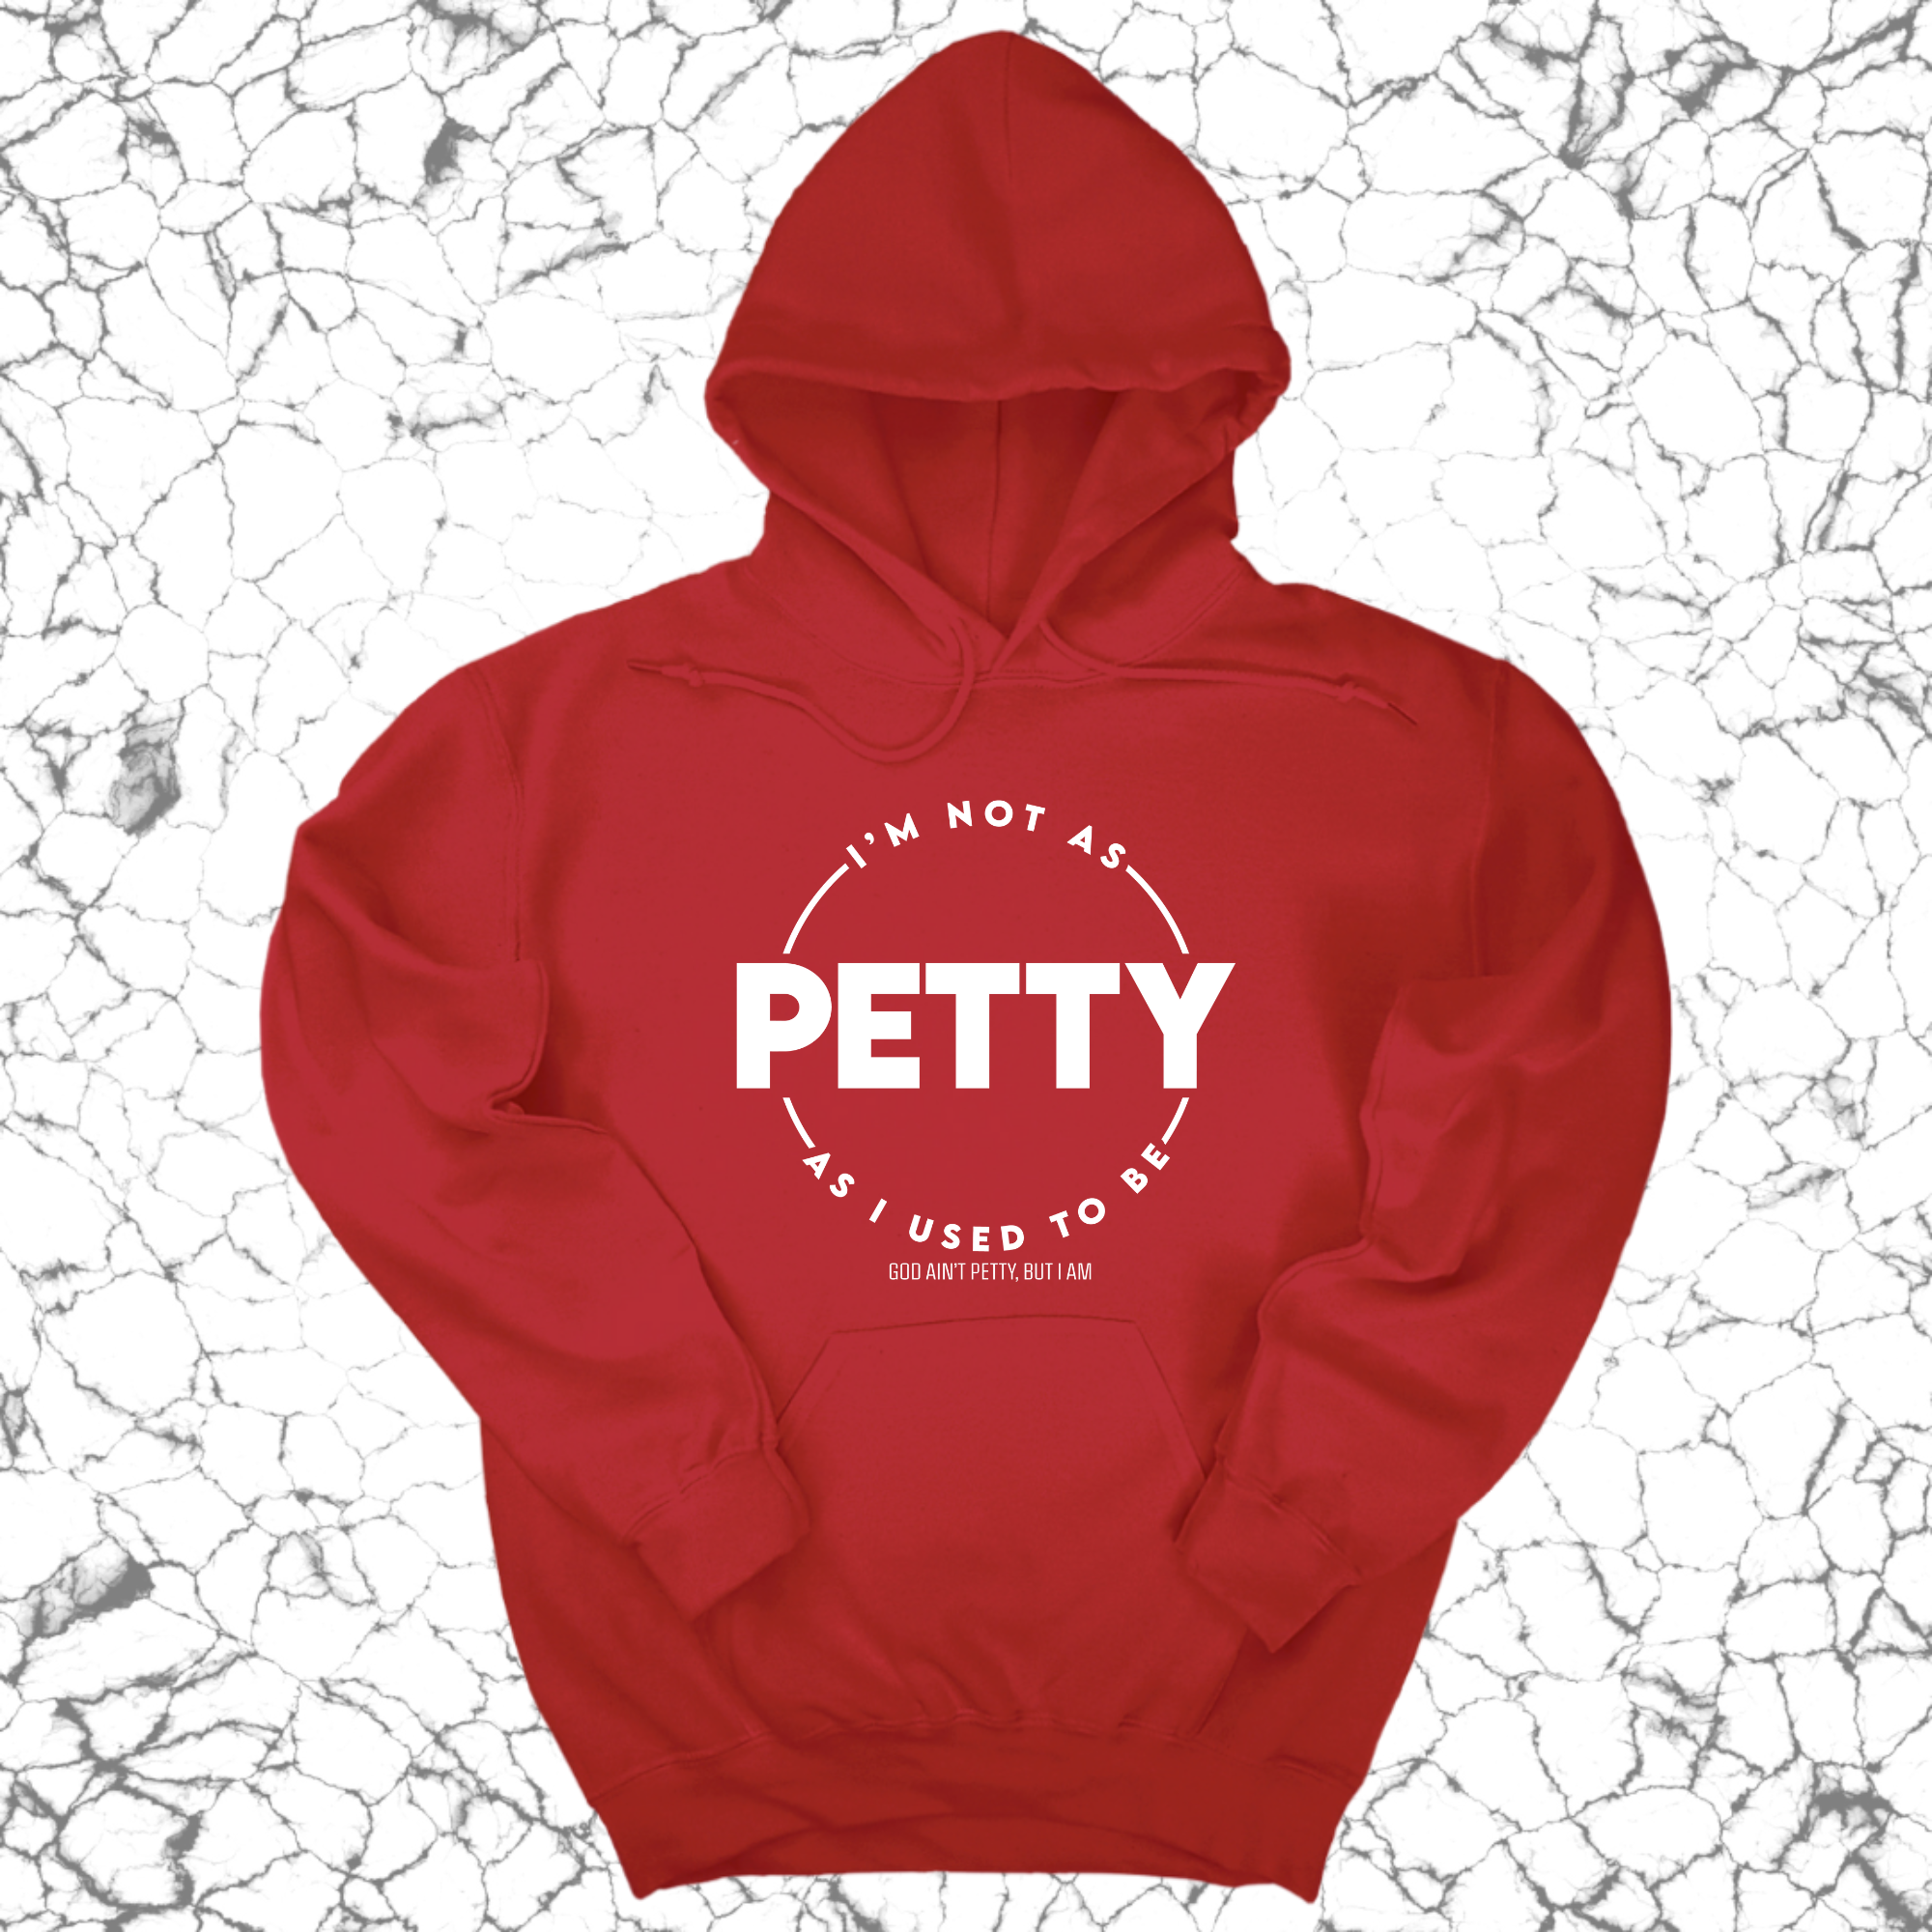 I'm not as petty as I used to be Unisex Hoodie-Hoodie-The Original God Ain't Petty But I Am